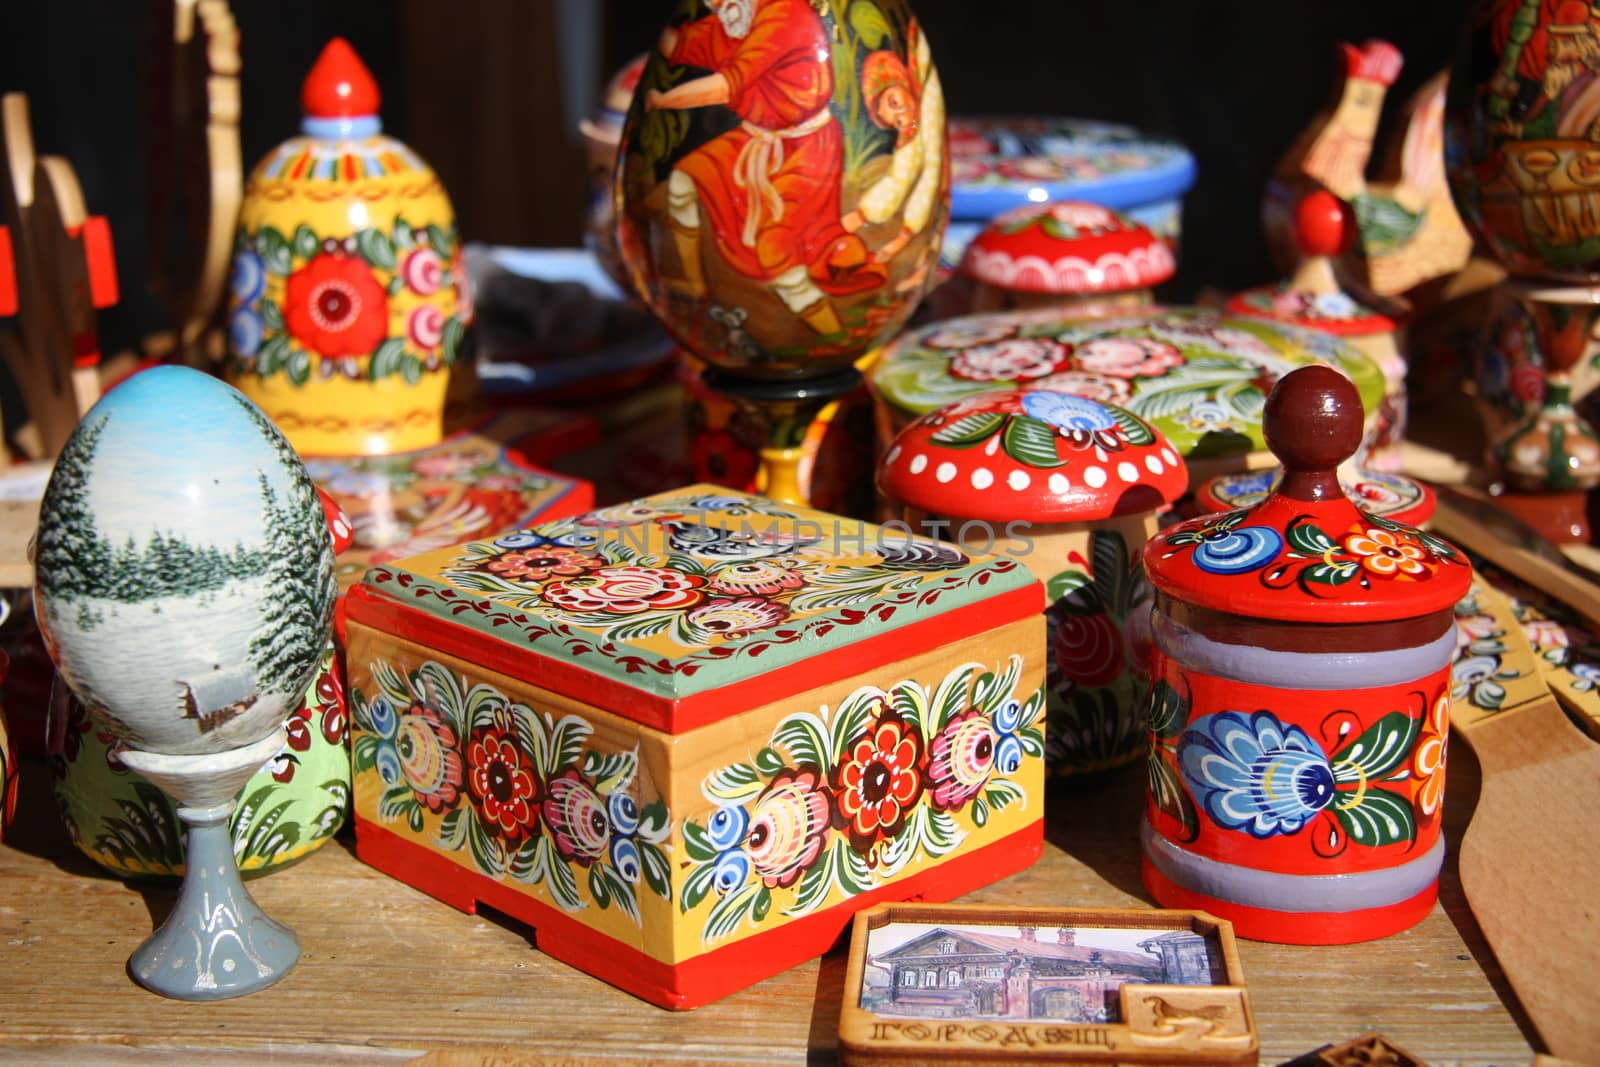 Traditional Russian wooden painted souvenirs from ancient town Gorodets